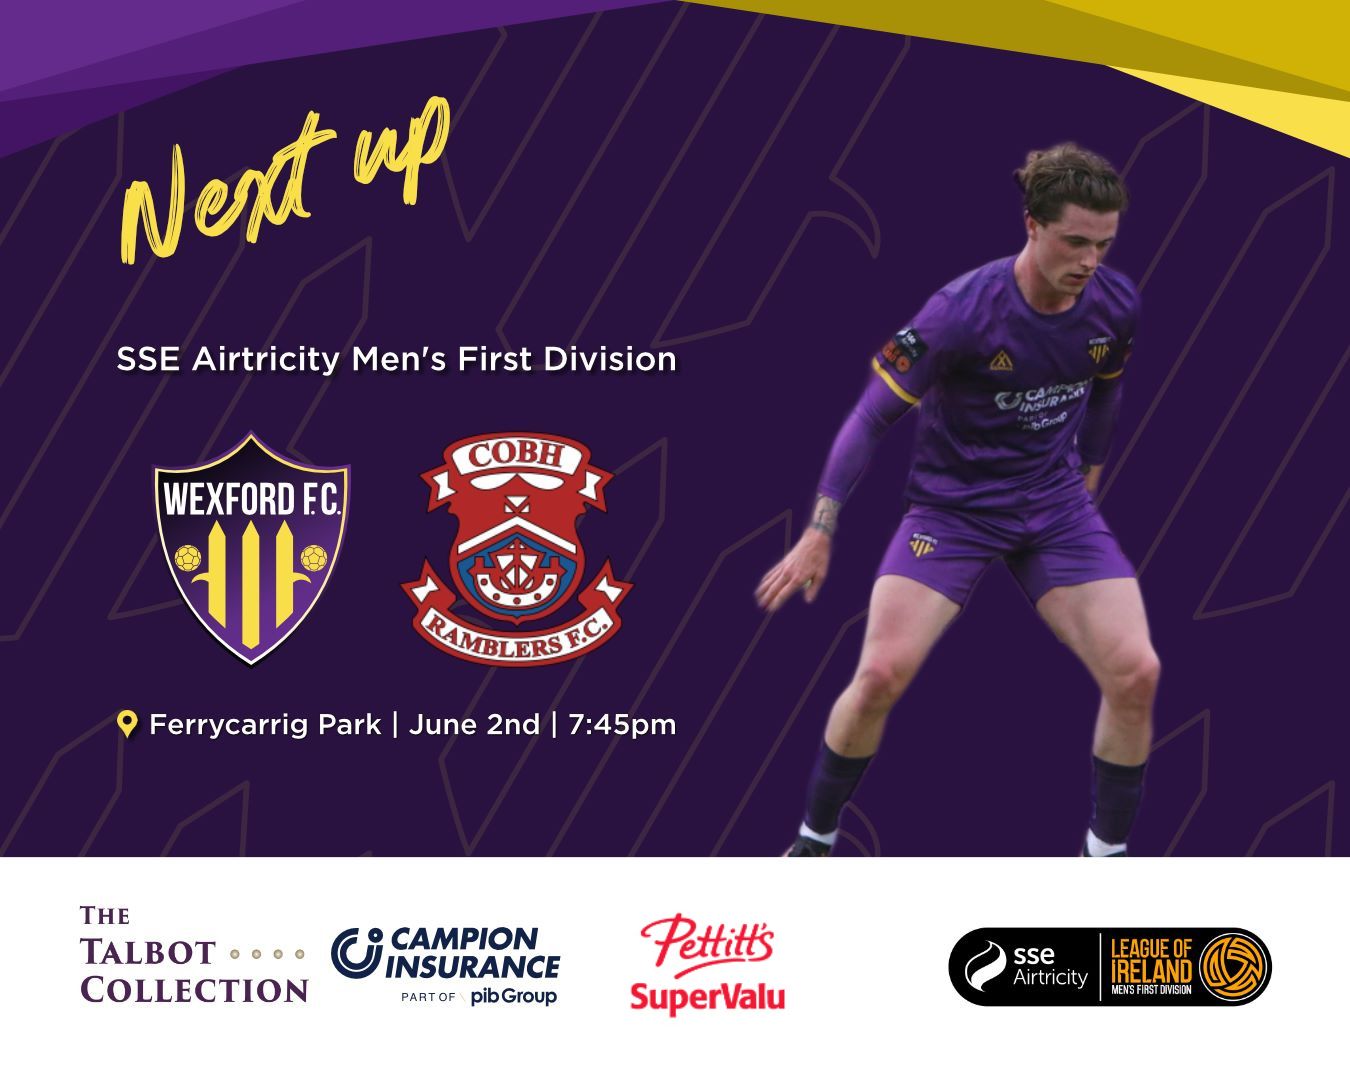 Match Preview:  Wexford FC vs Cobh Ramblers